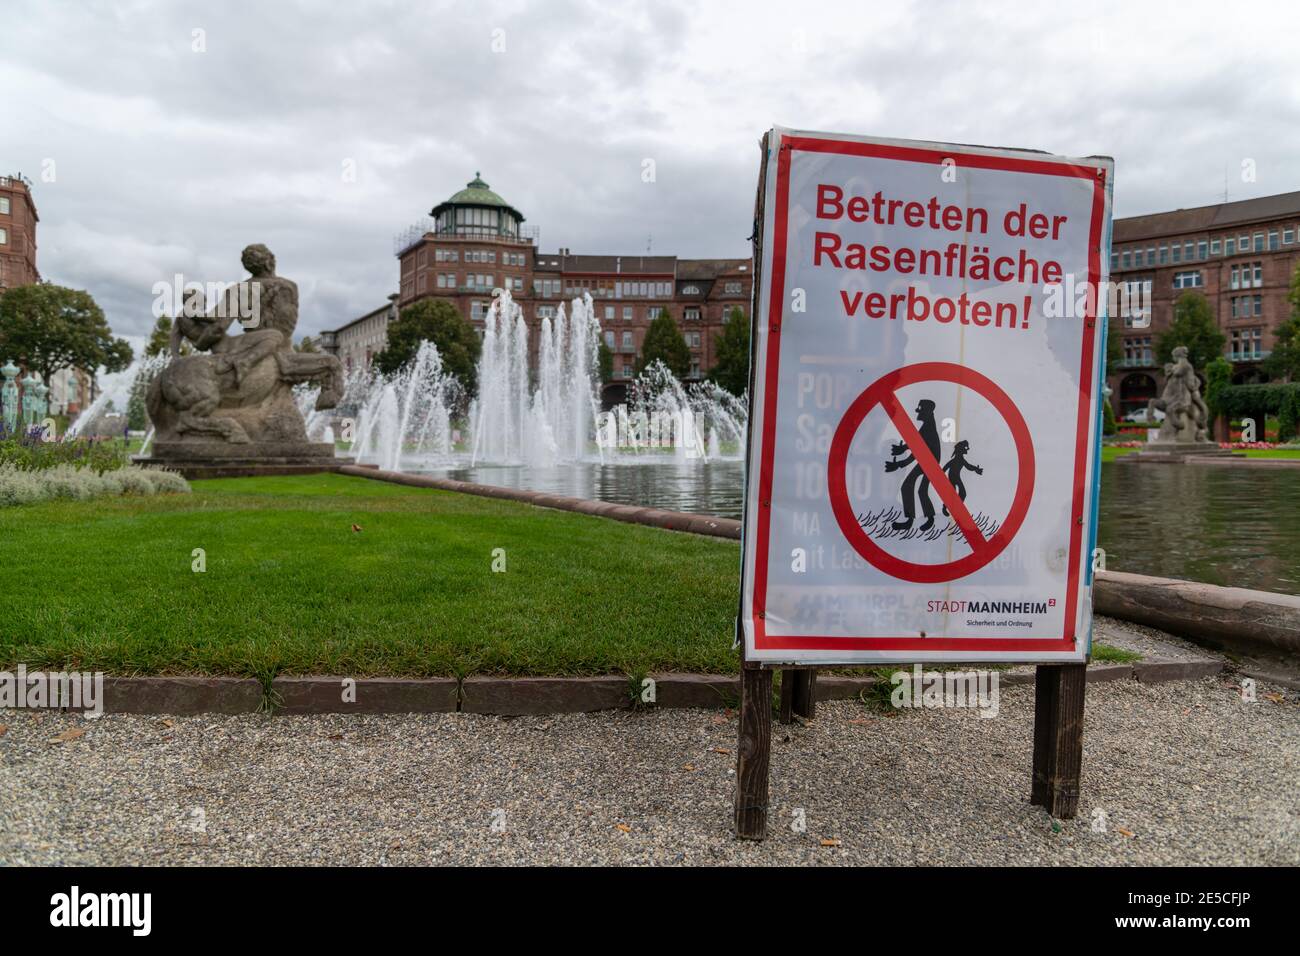 Mannheim, Baden-Wuerttemberg / Germany, 09 25 2020: Sign saying "Betreten der Rasenfläche verboten" (trespassing on the grass is prohibited) with a fo Stock Photo